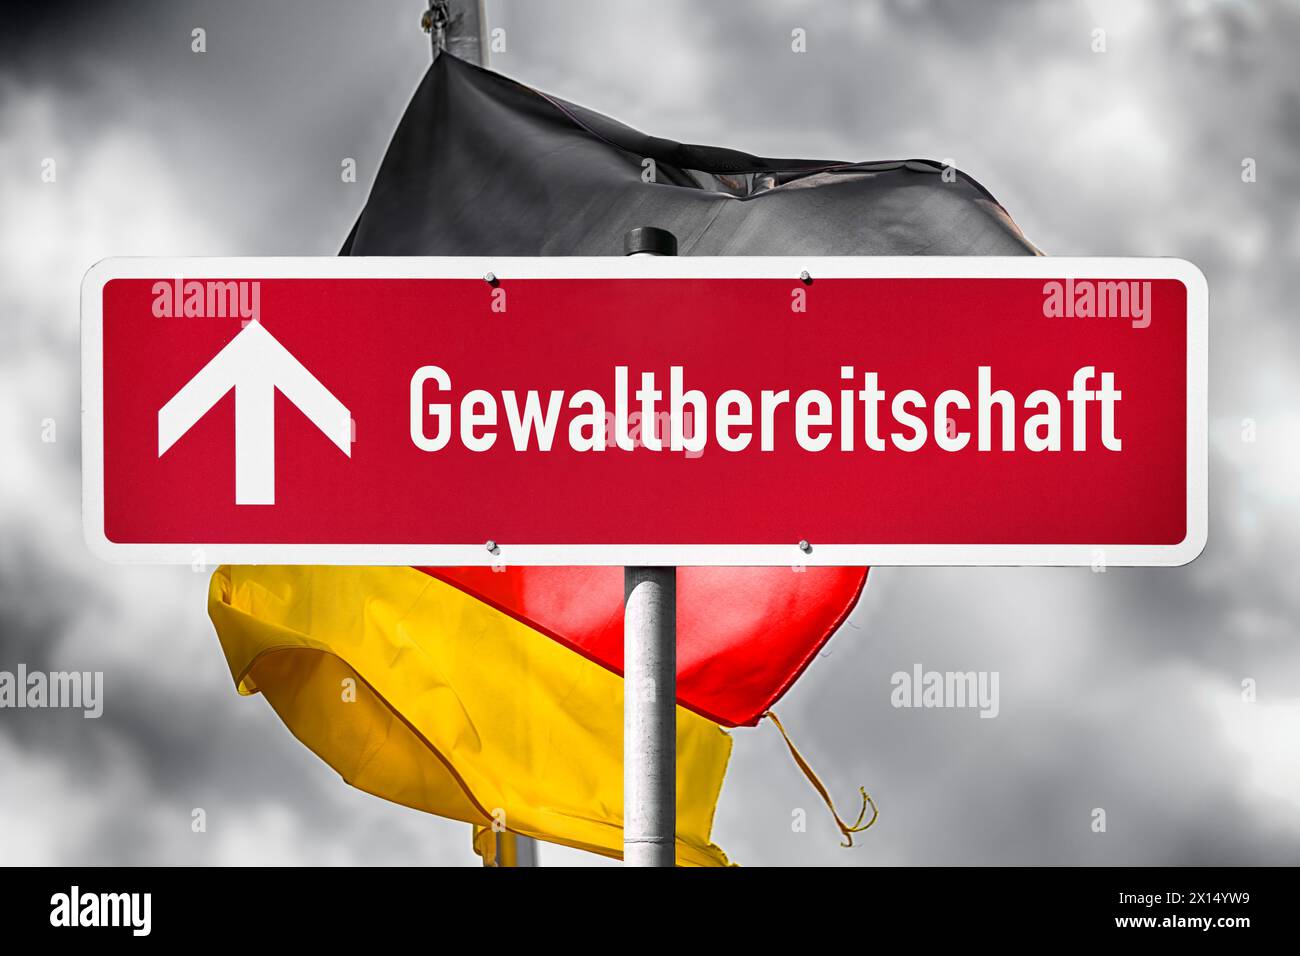 Red Sign With The Words Gewaltbereitschaft And A Rising Arrow In Front Of A German Flag, Photomontage Stock Photo